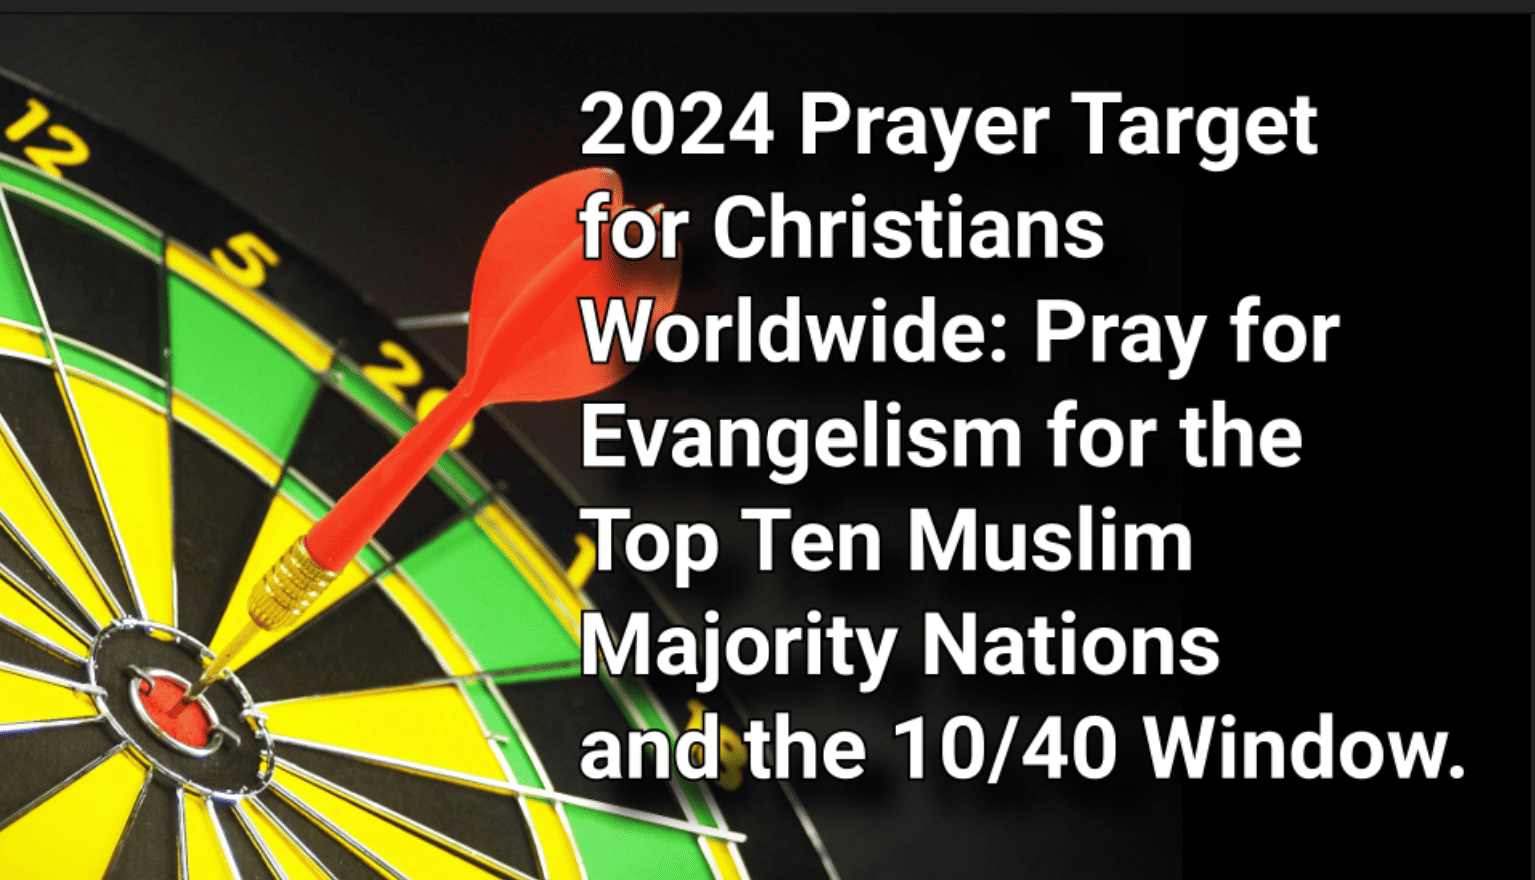 2024 Prayer Target for Christians Worldwide: Answering the Call to Pray for Evangelism for the Top Ten Muslim-Majority Nations and the 10/40 Window.